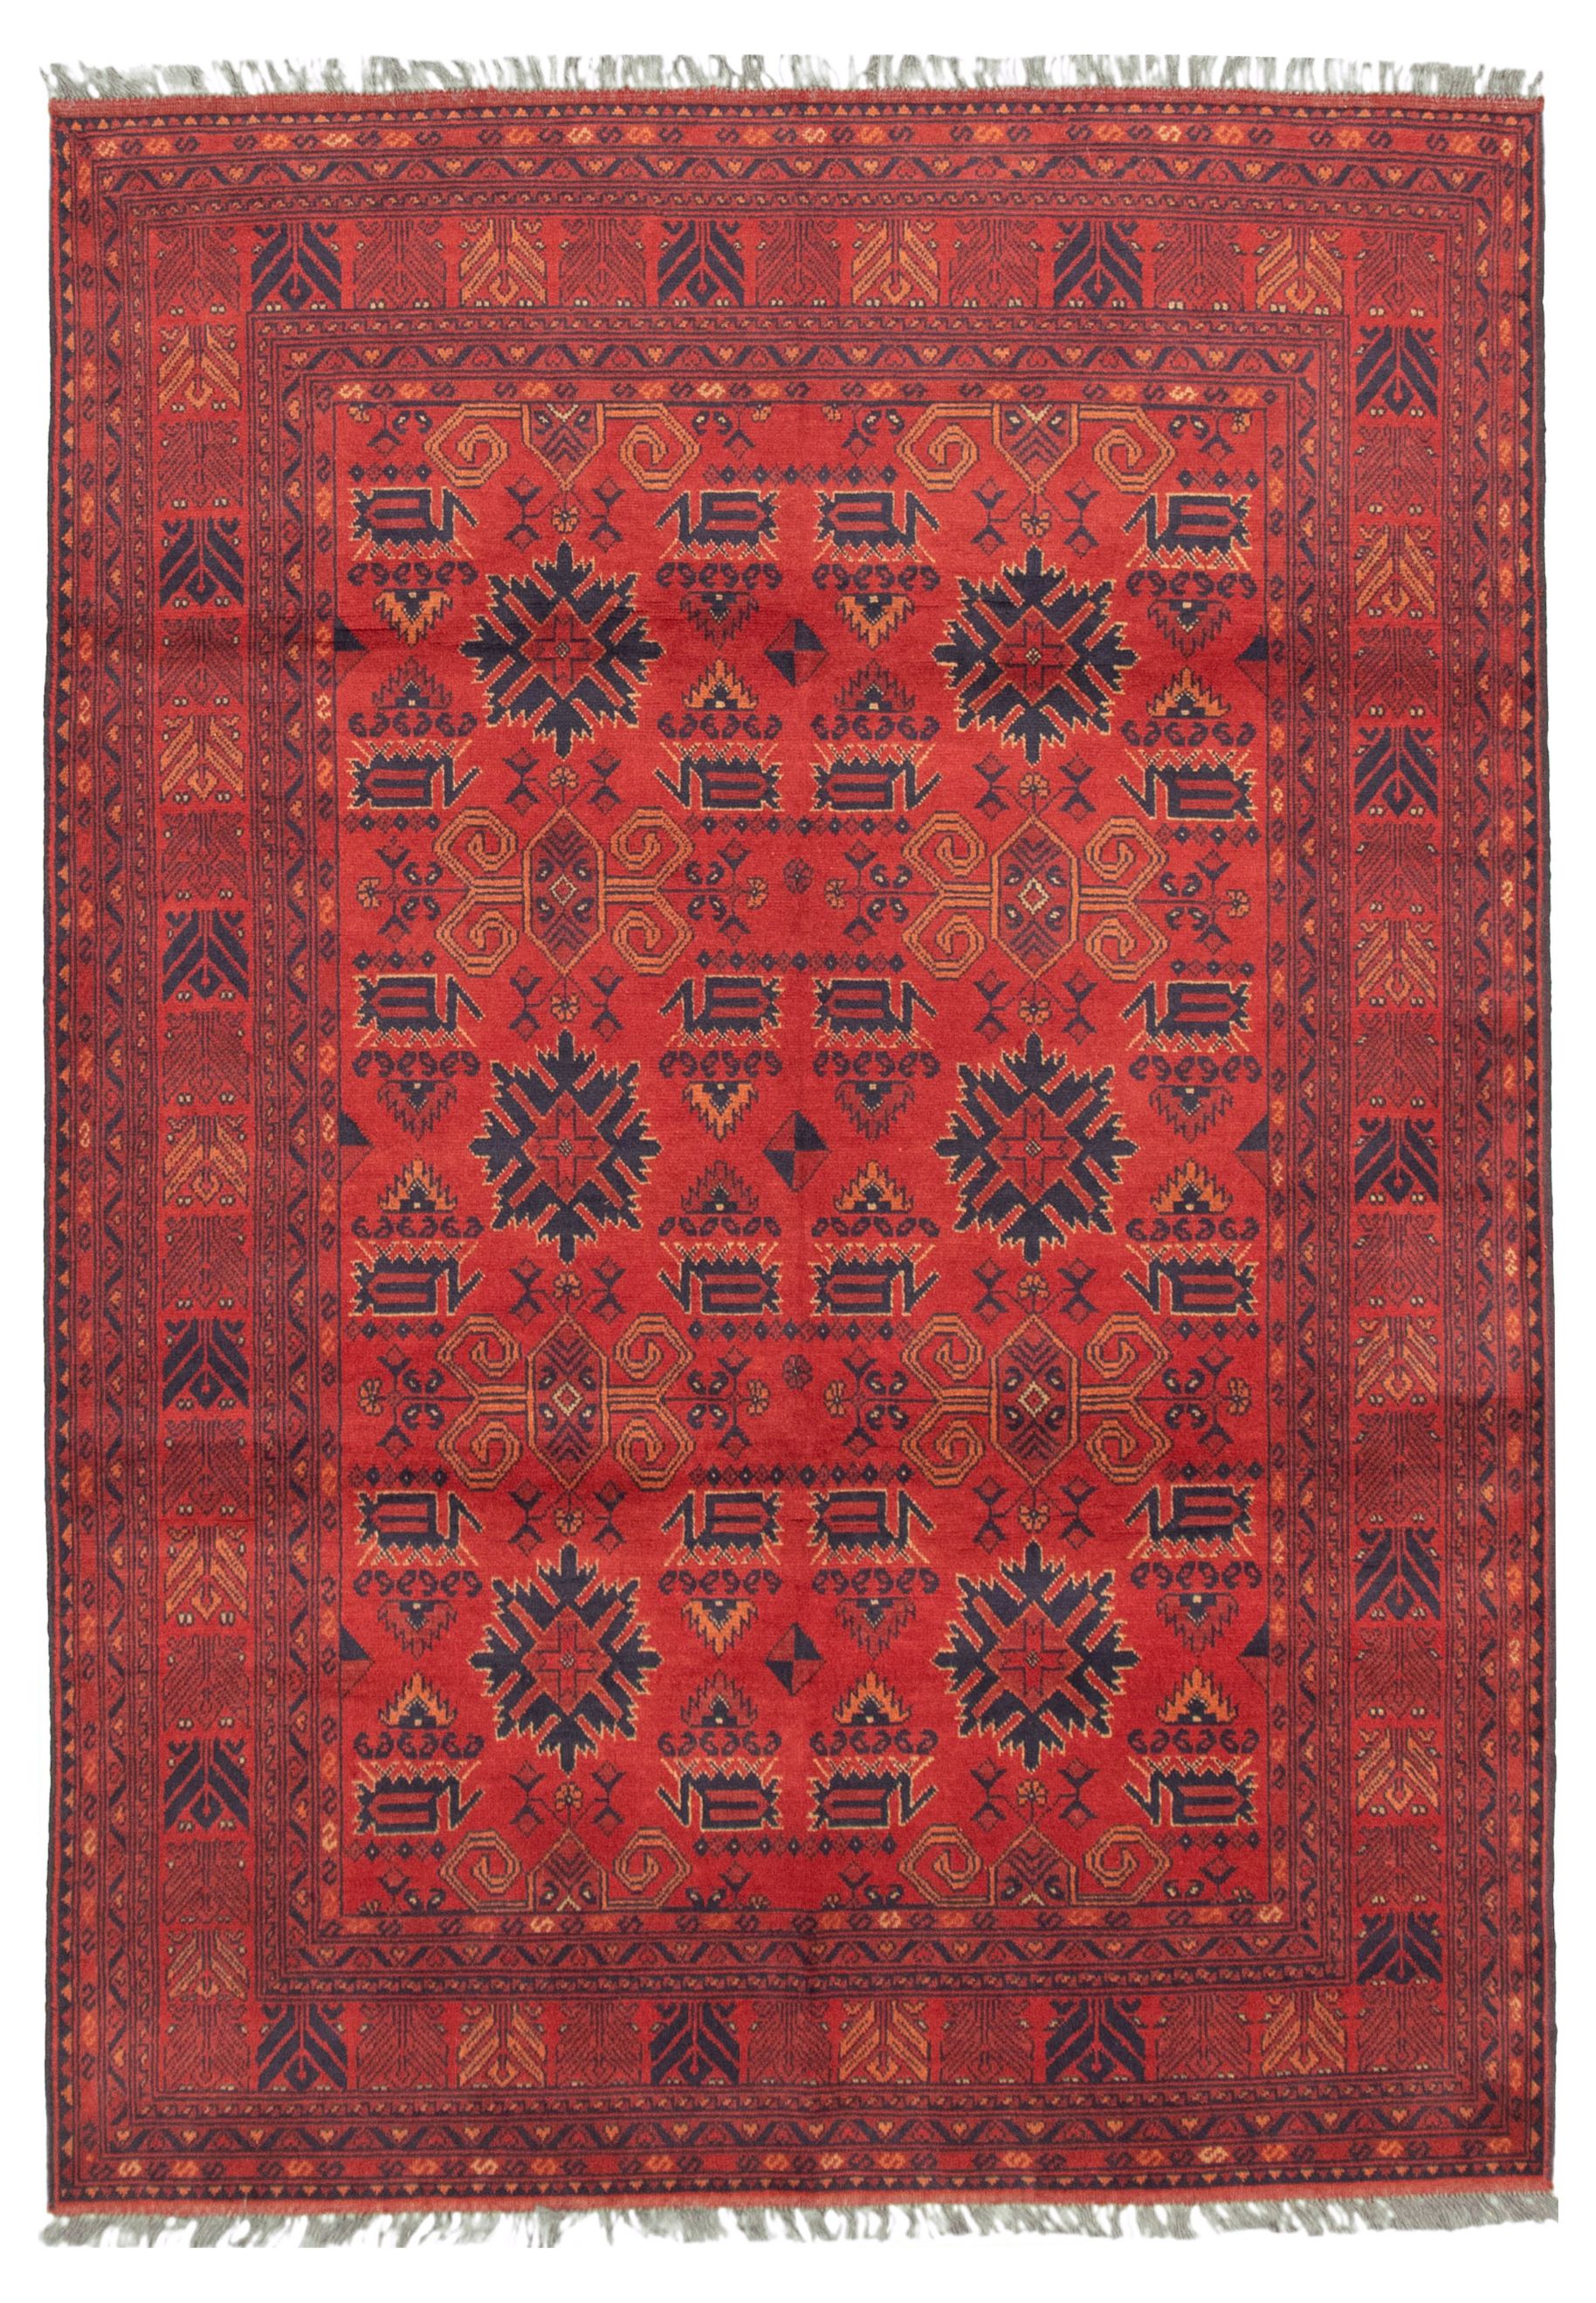 Hand-knotted Finest Khal Mohammadi Red Wool Rug 5'7" x 7'8"  Size: 5'7" x 7'8"  